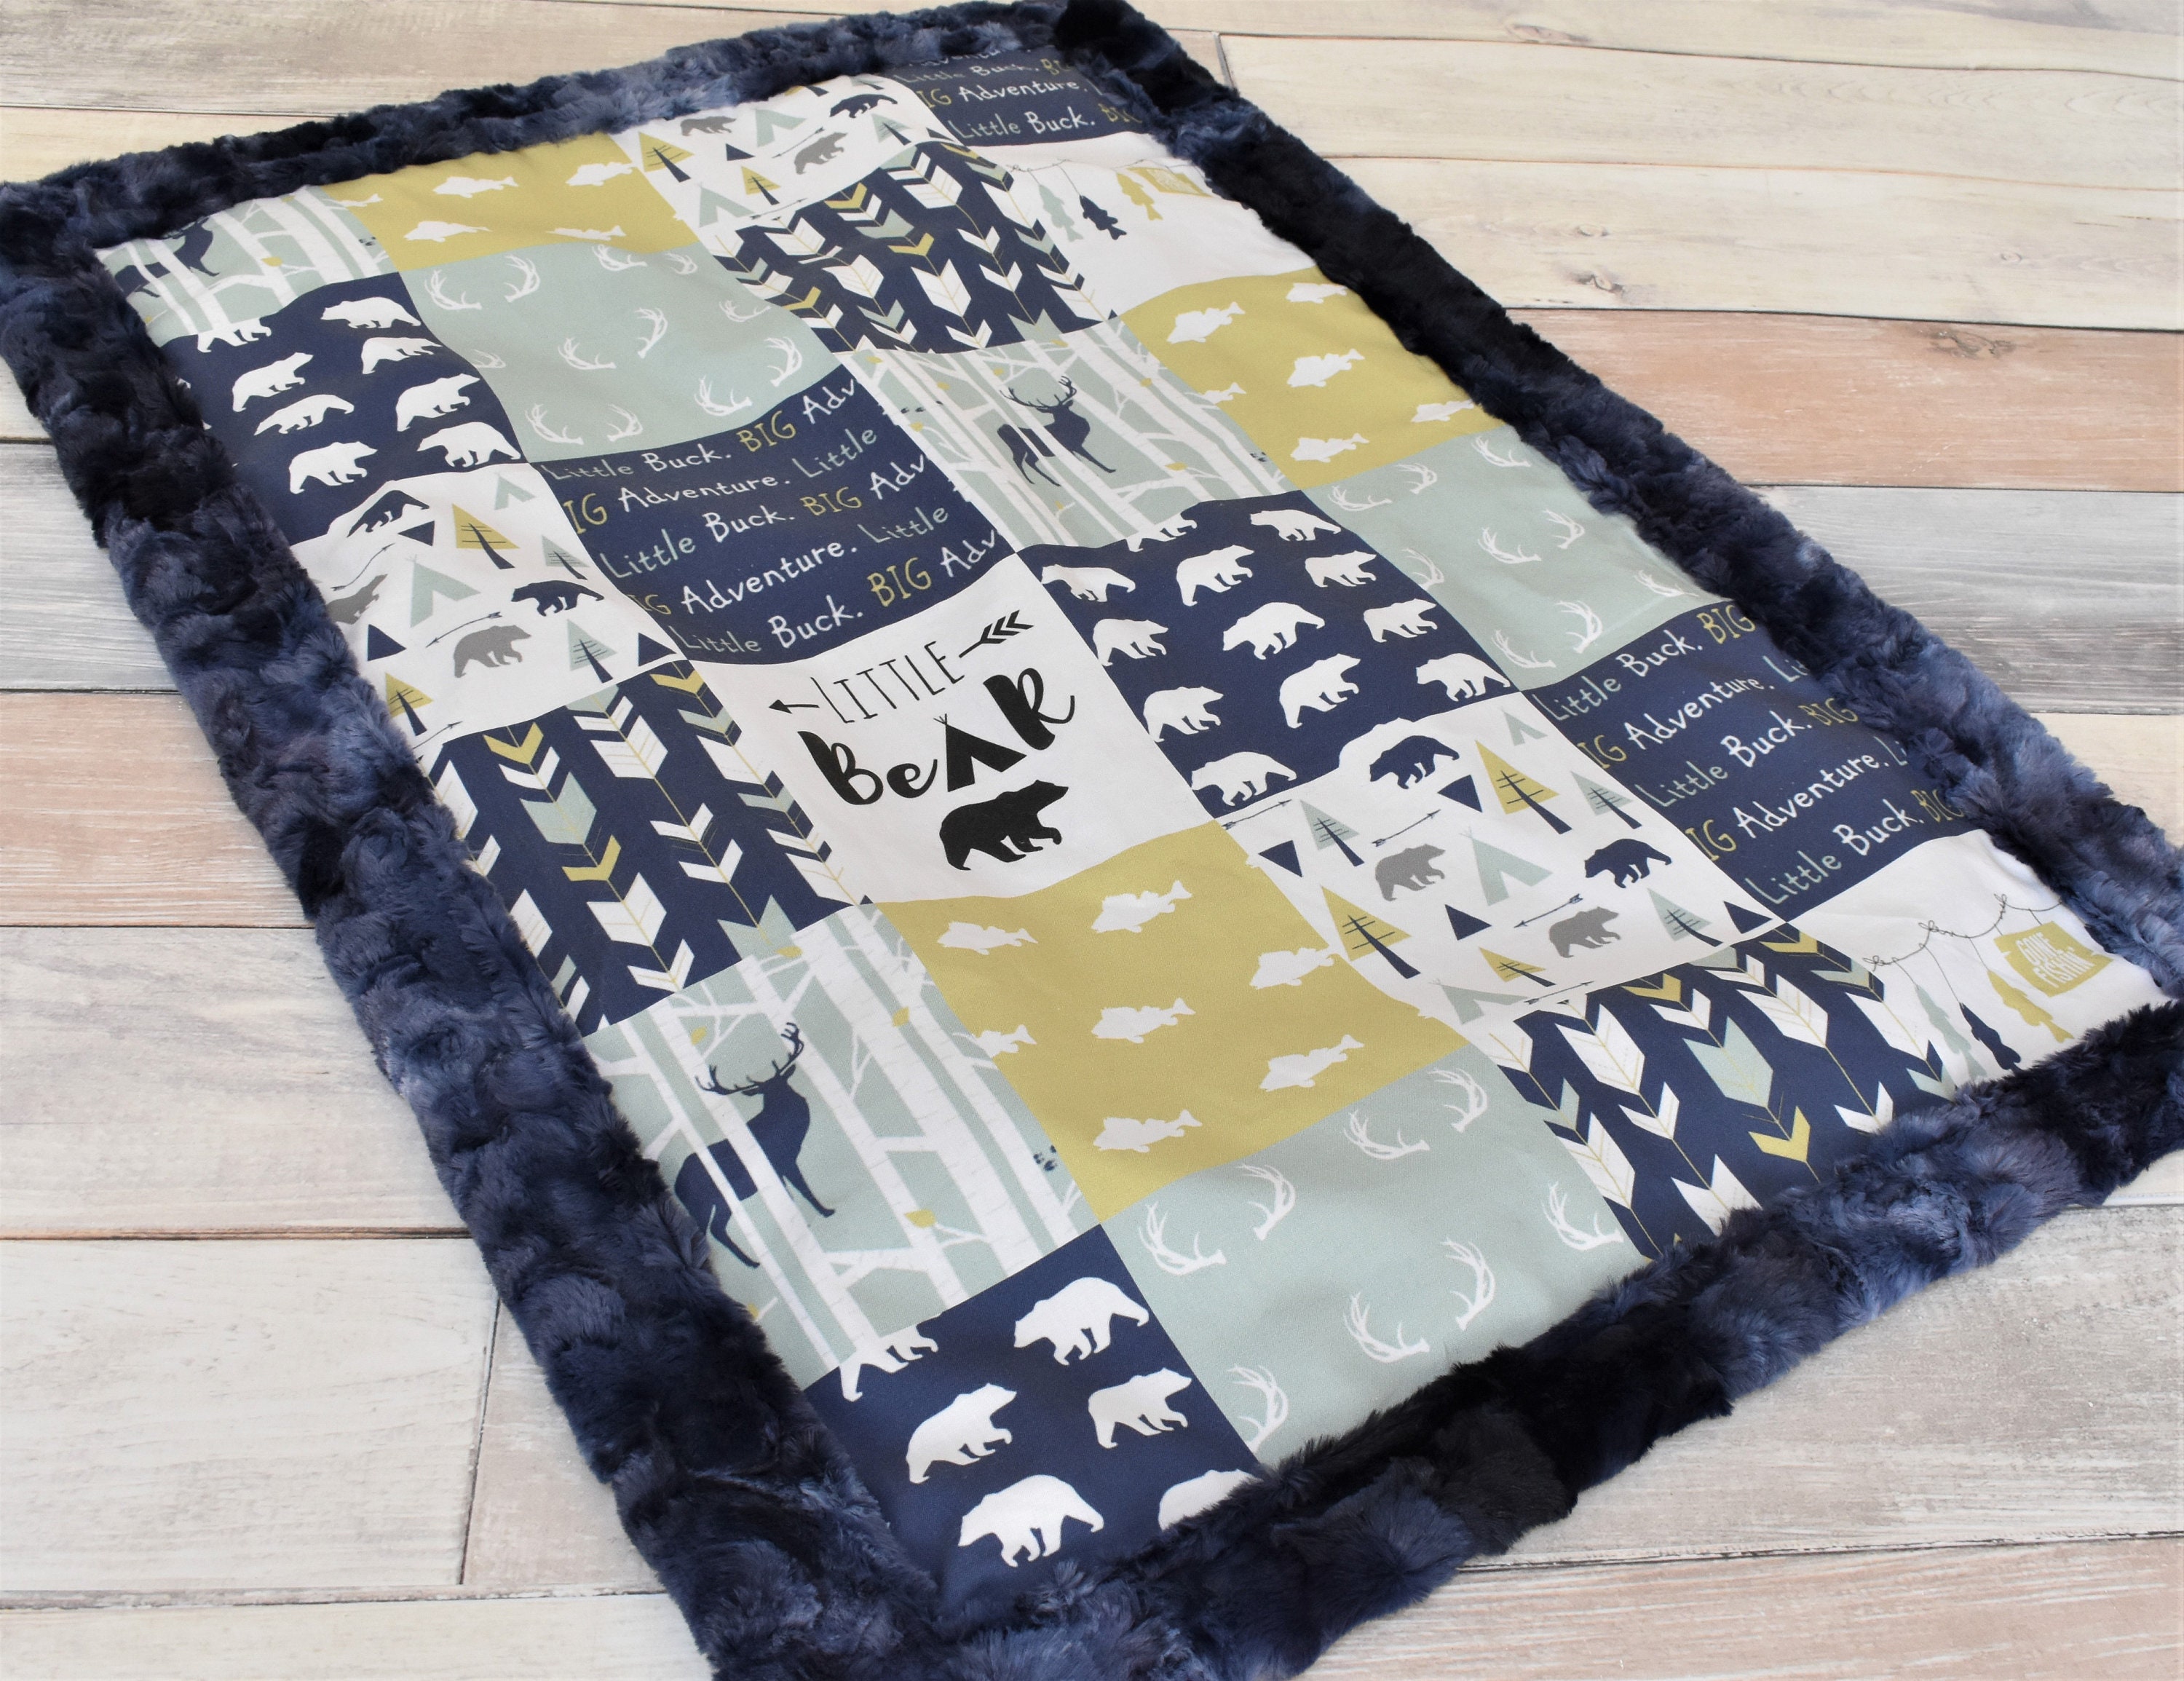 Country forest bear wolf deer scenery Baby crib blanket/ throw Black white and grays forest adventure themed baby blanket.